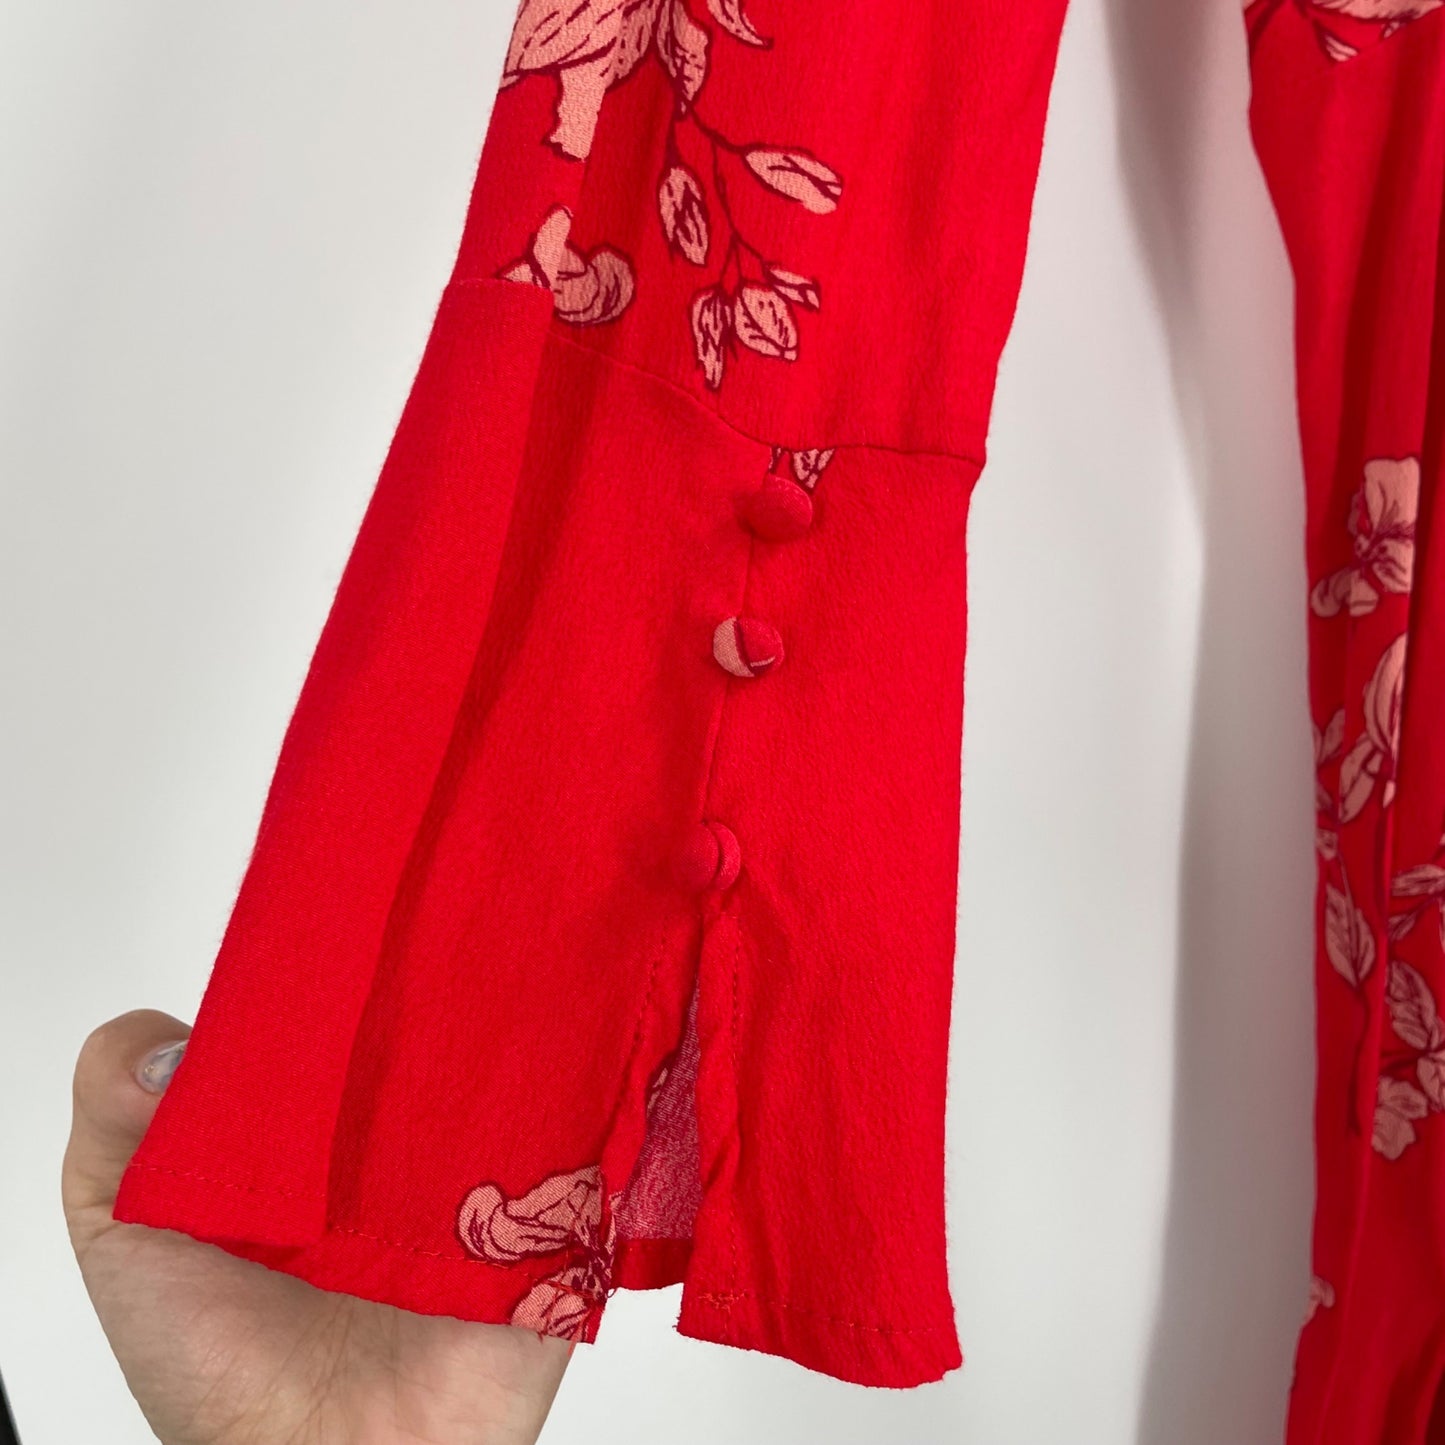 Dress Forum Red Floral Long Sleeve Front Tie Dress Womens Size Large Buttons